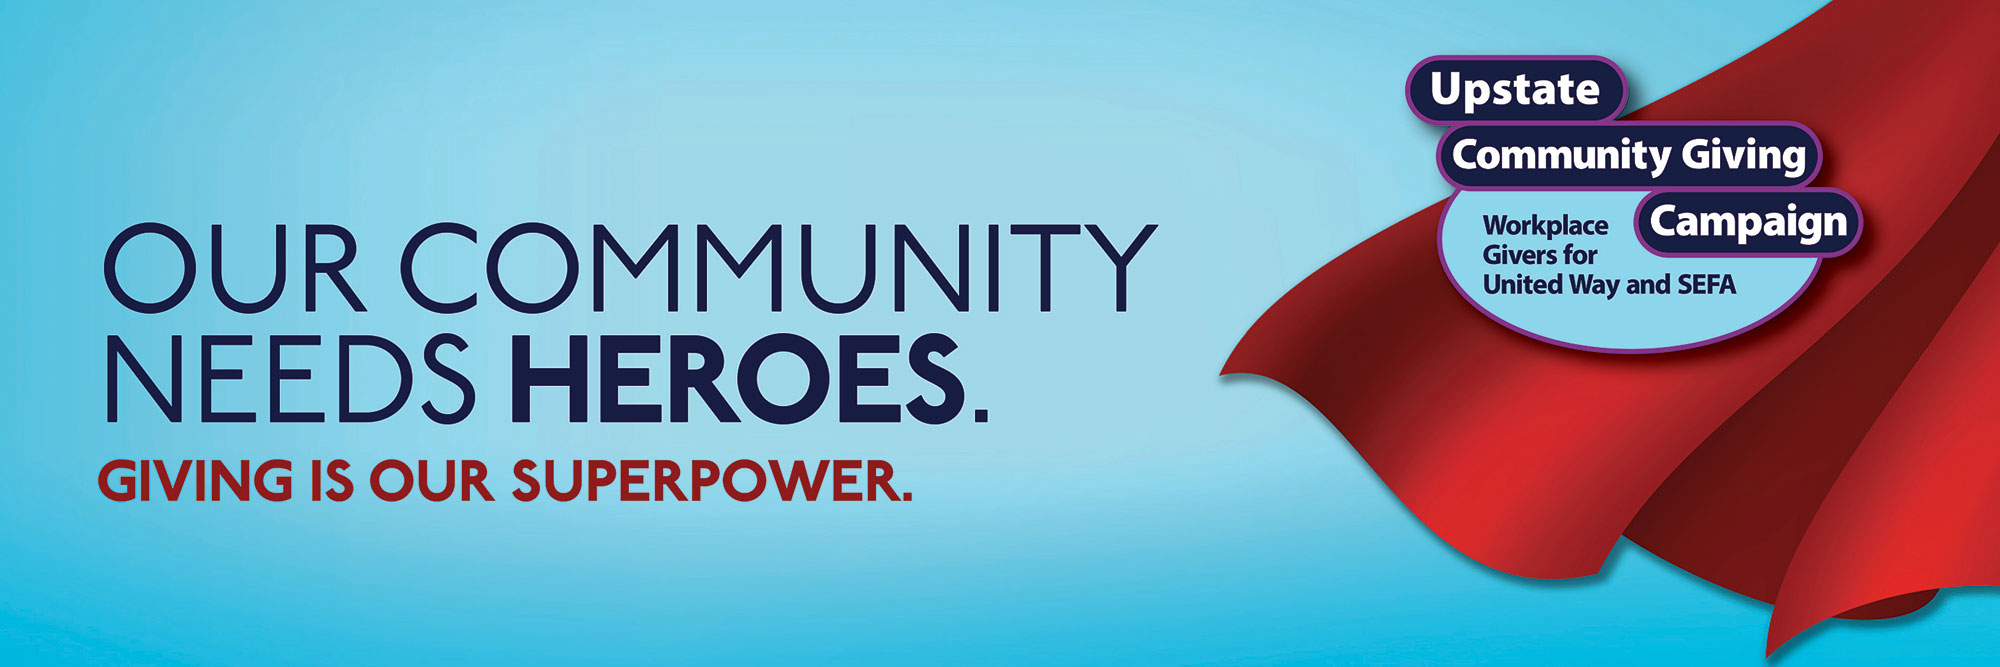 Community Giving Campaign. Now more than ever, our community needs heroes